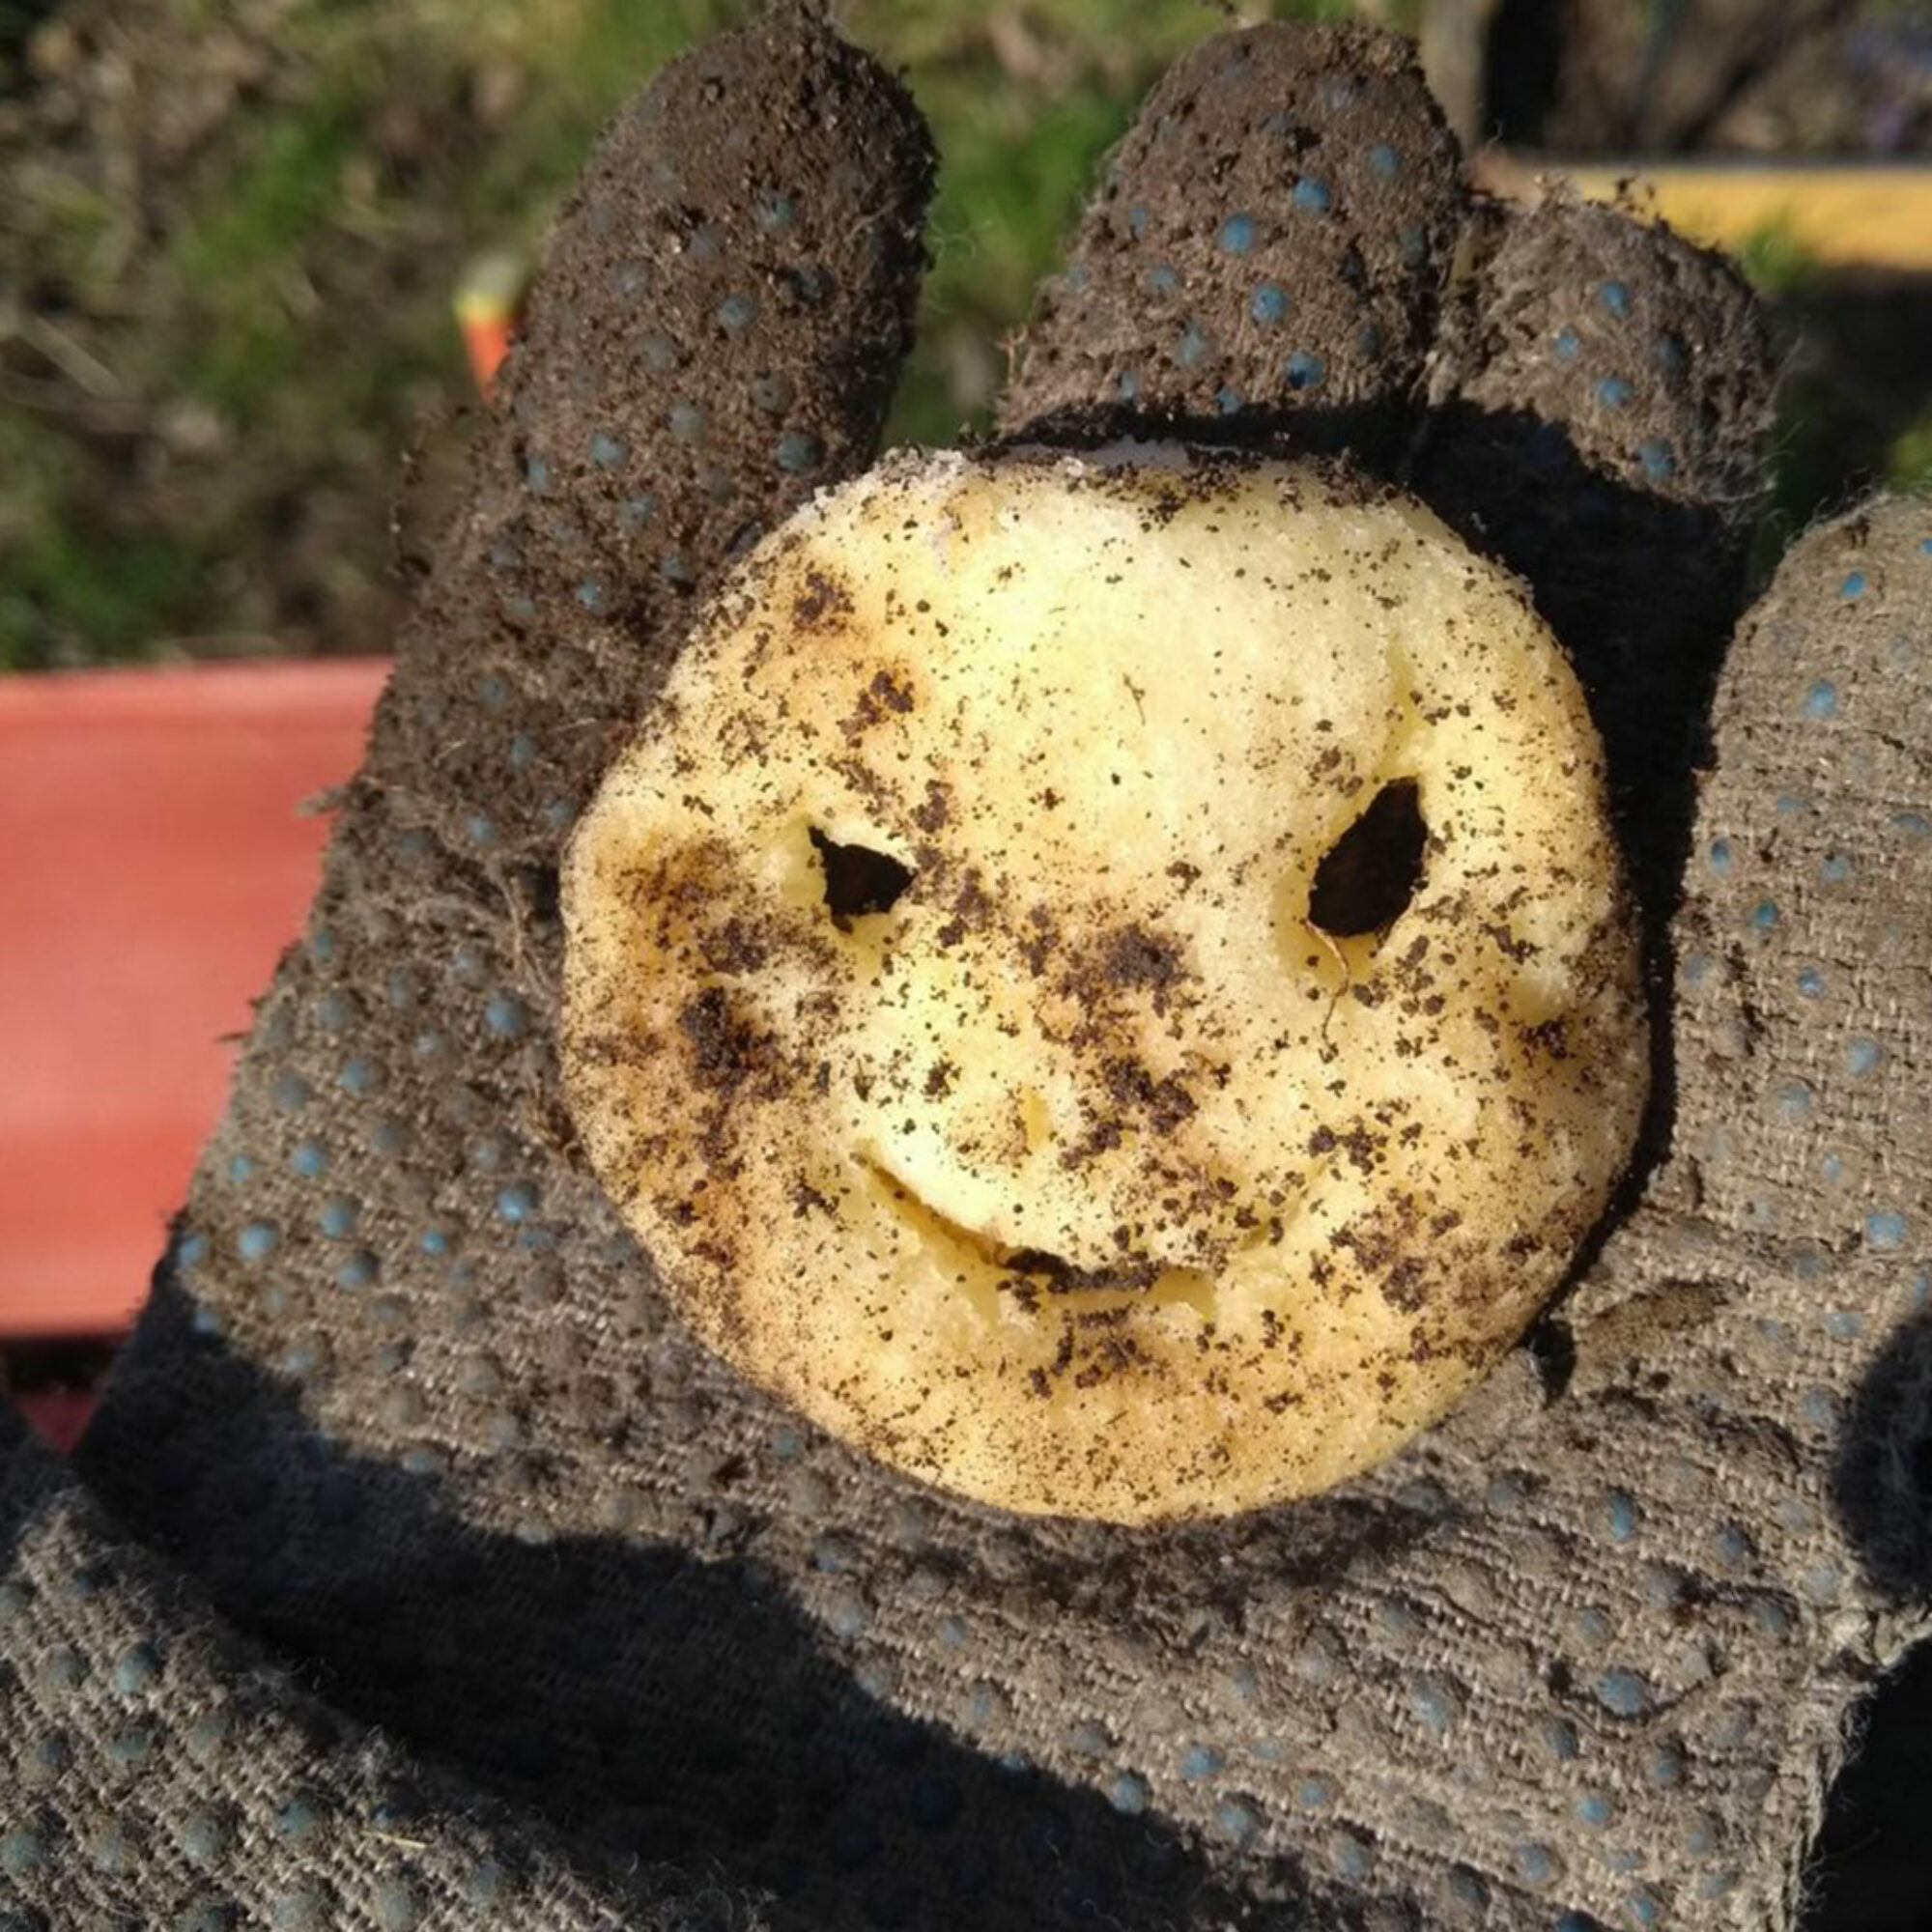 A dirty potato smiley face rests in a hand.